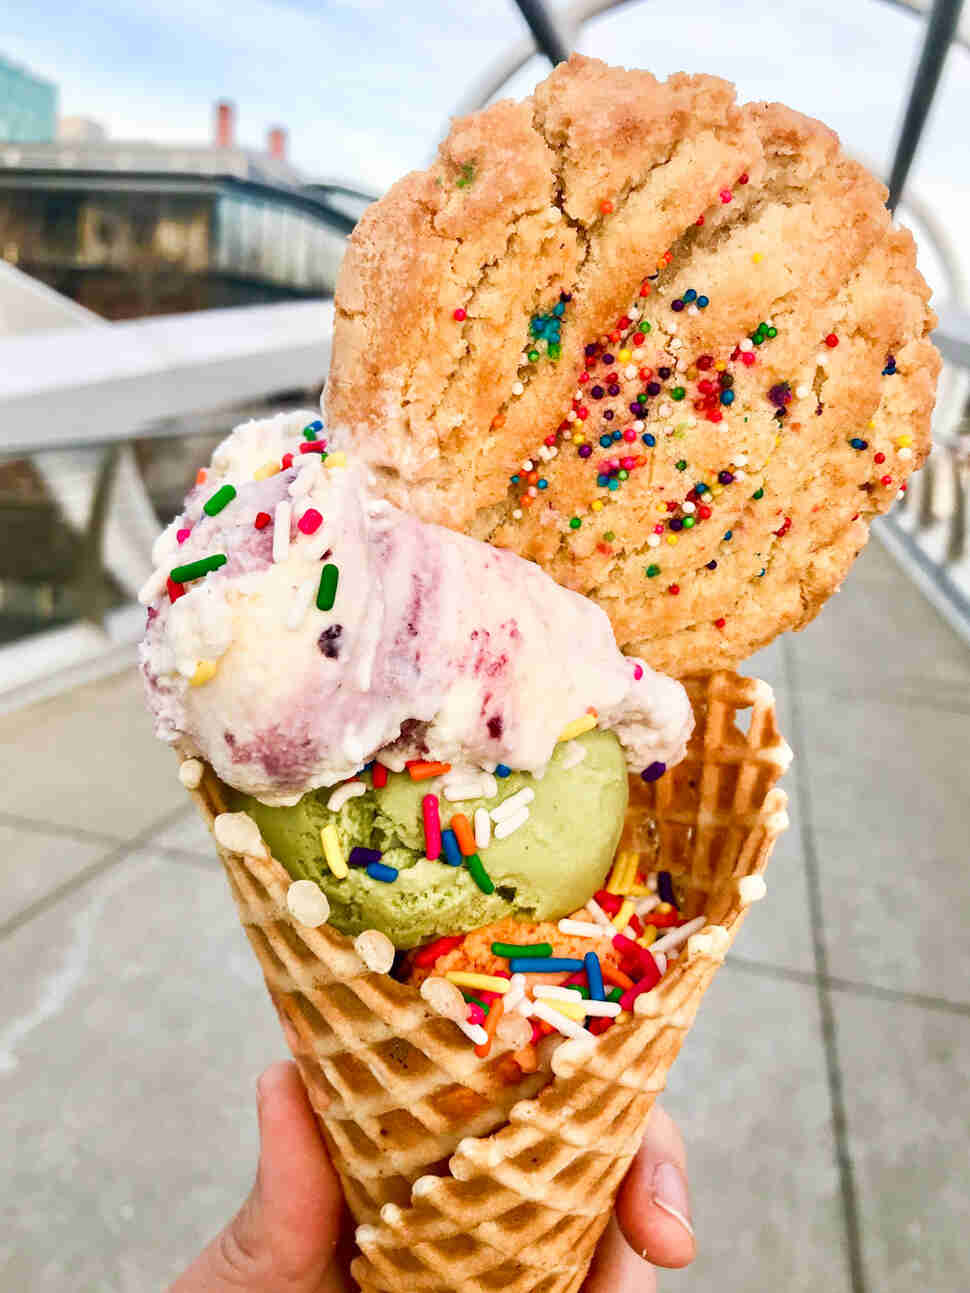 Best Ice Cream Shops in America: Places in the US With ...